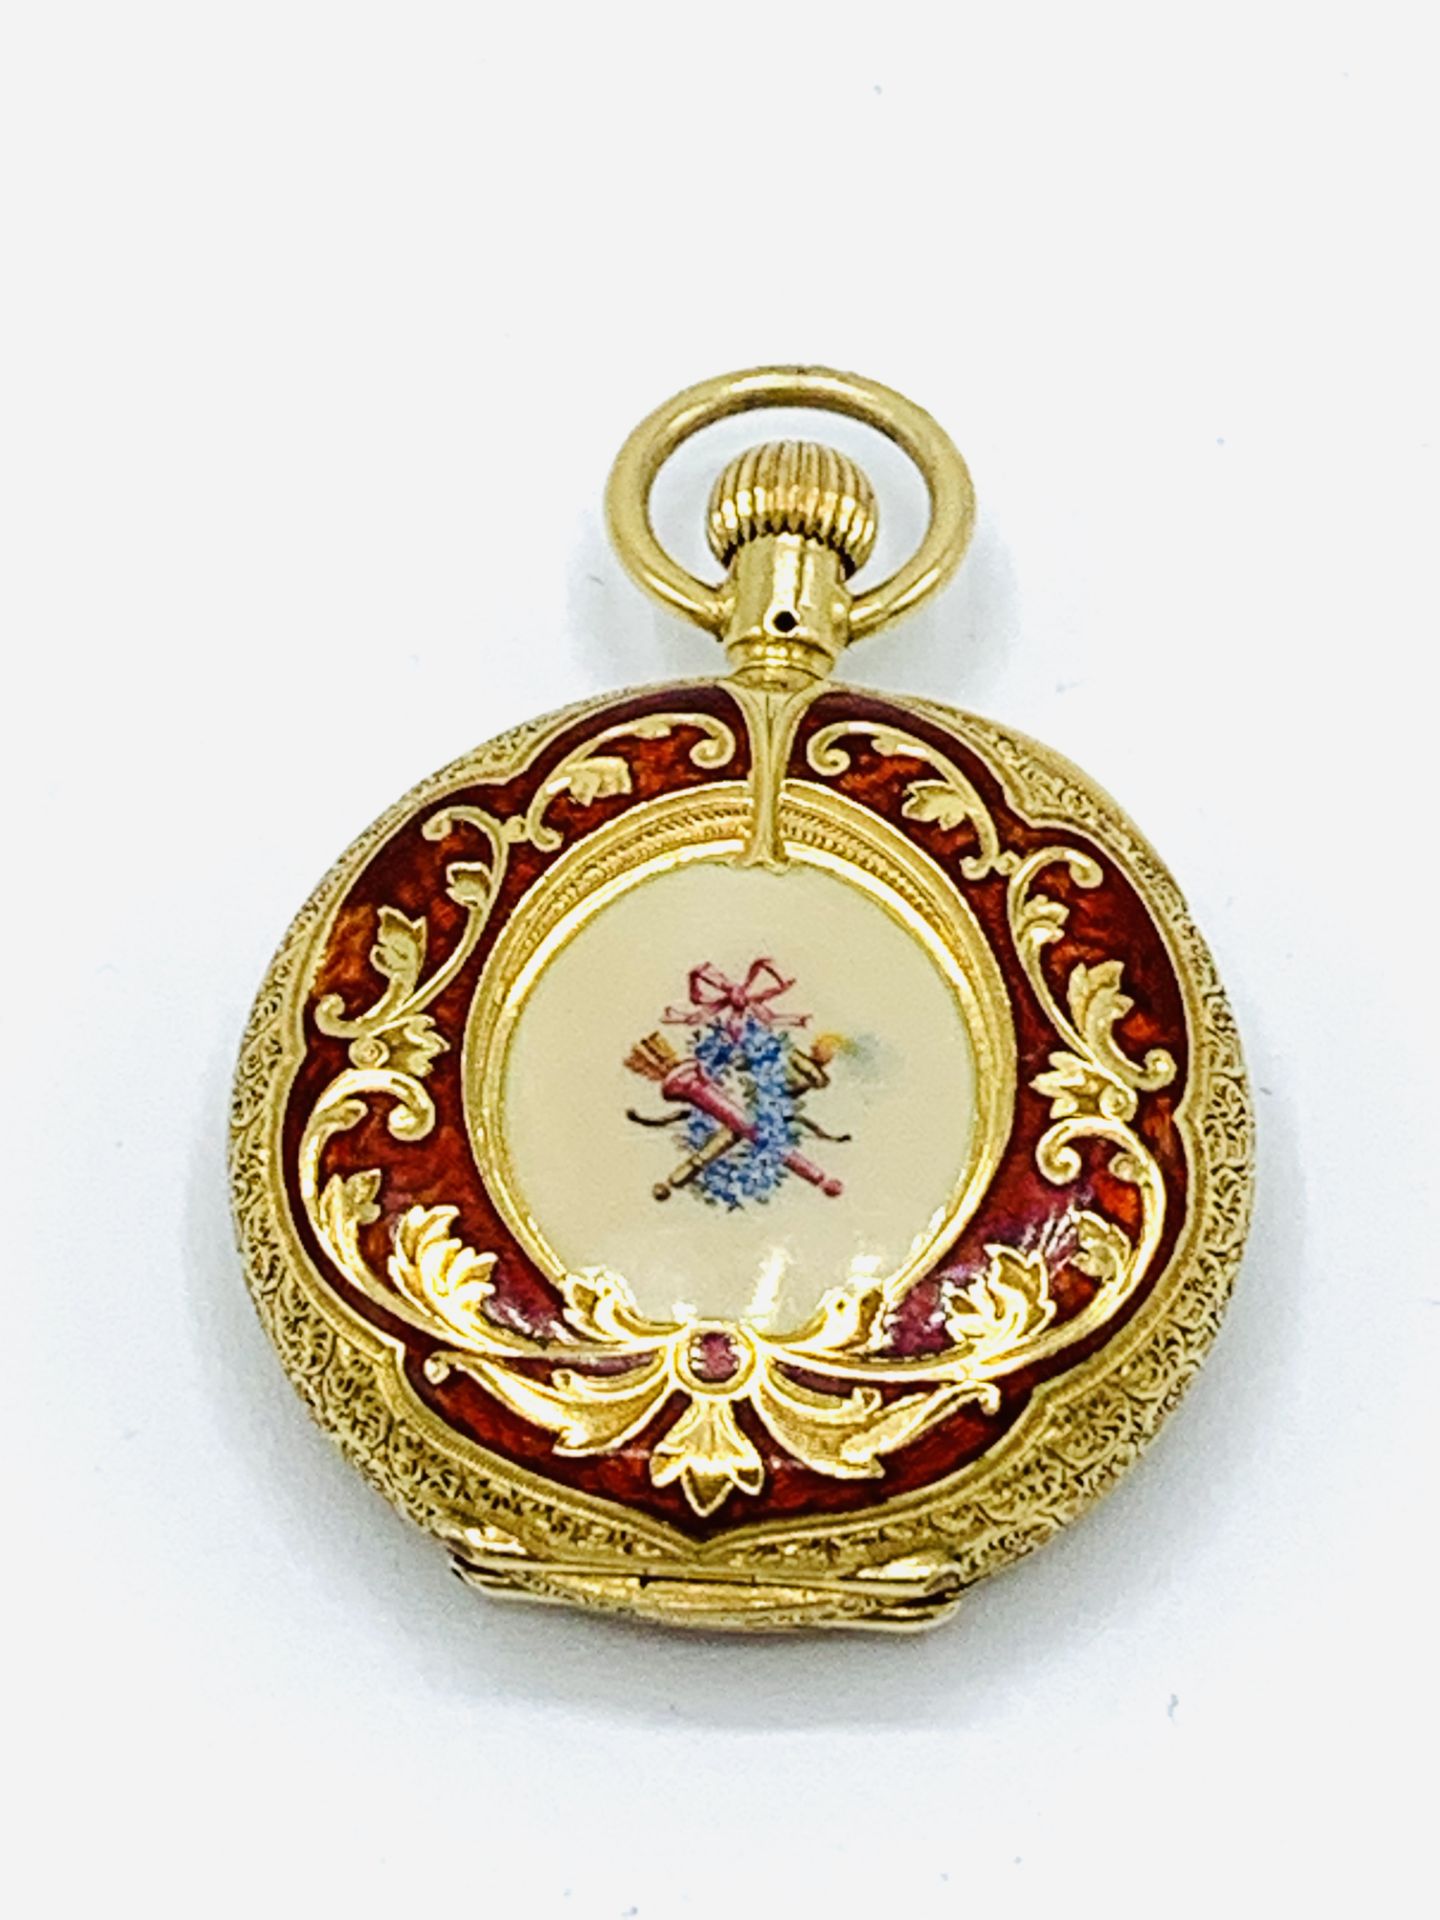 18ct gold small hunter pocket watch, with diamond and enamel cover, by Waltham, Massachusetts - Image 7 of 7